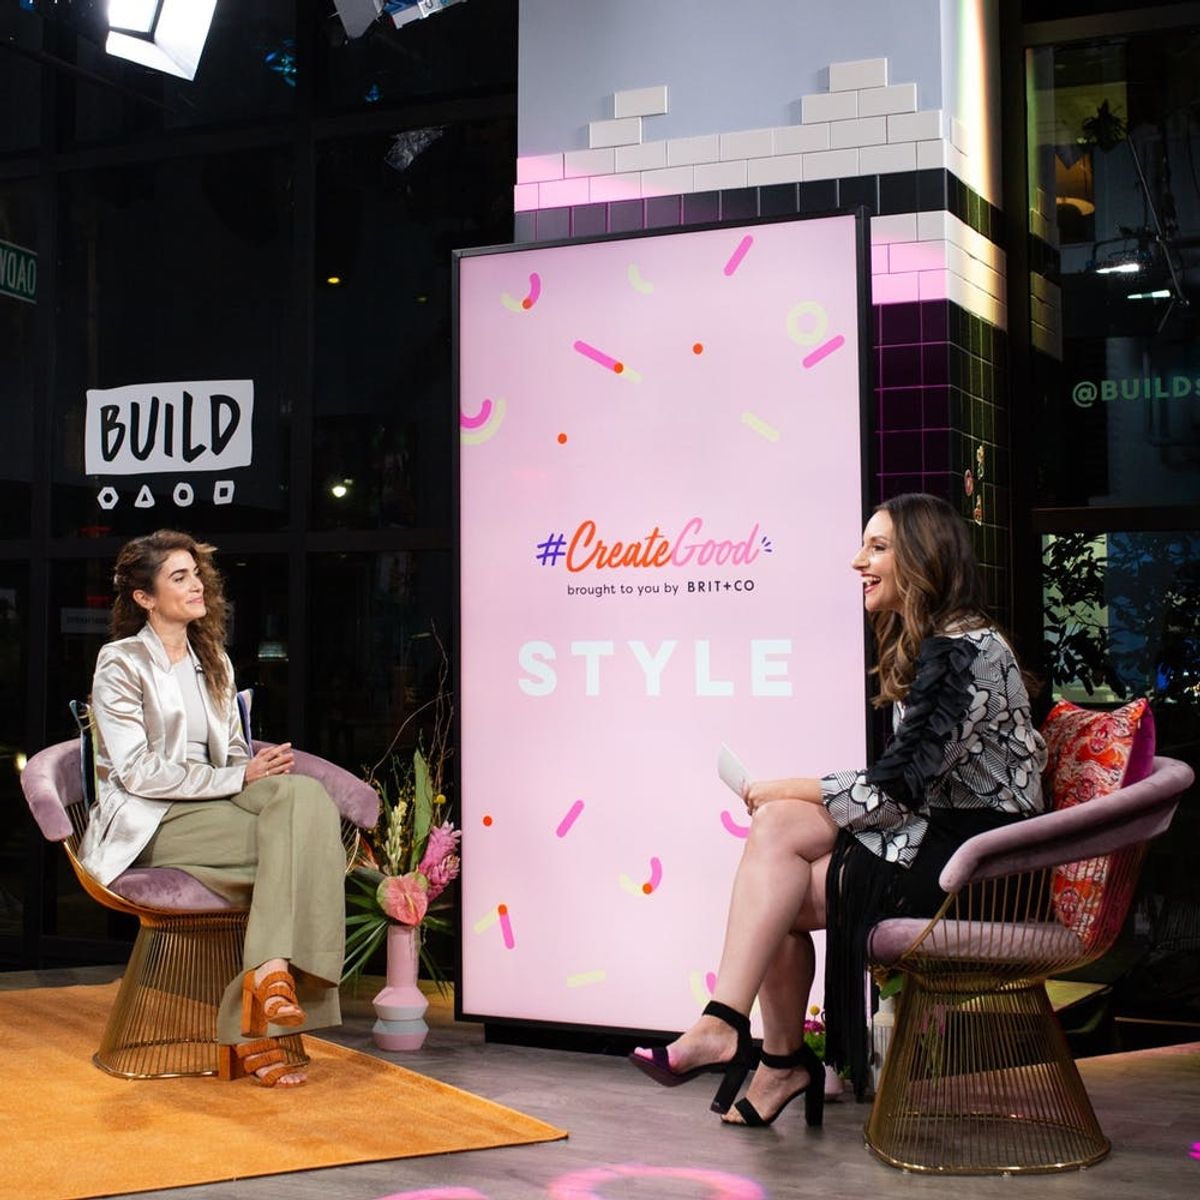 Nikki Reed Shines a Light on Sustainable Fashion, Plus More Highlights from #CreateGood 2018 Night 5